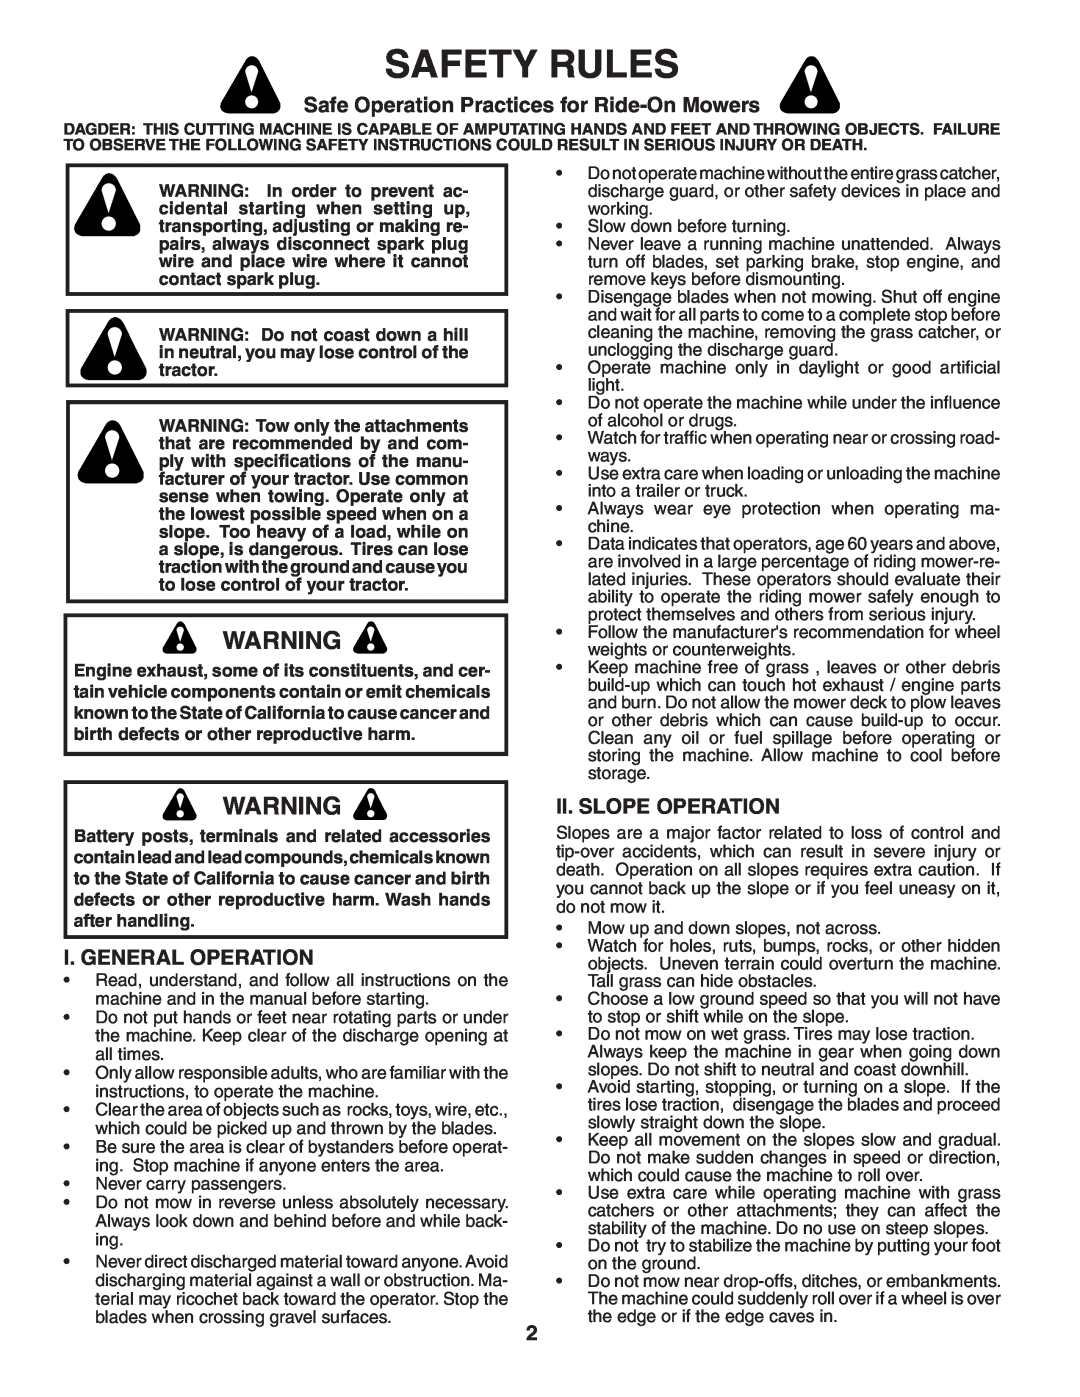 Poulan PB22H42YT Safety Rules, Safe Operation Practices for Ride-On Mowers, I. General Operation, Ii. Slope Operation 